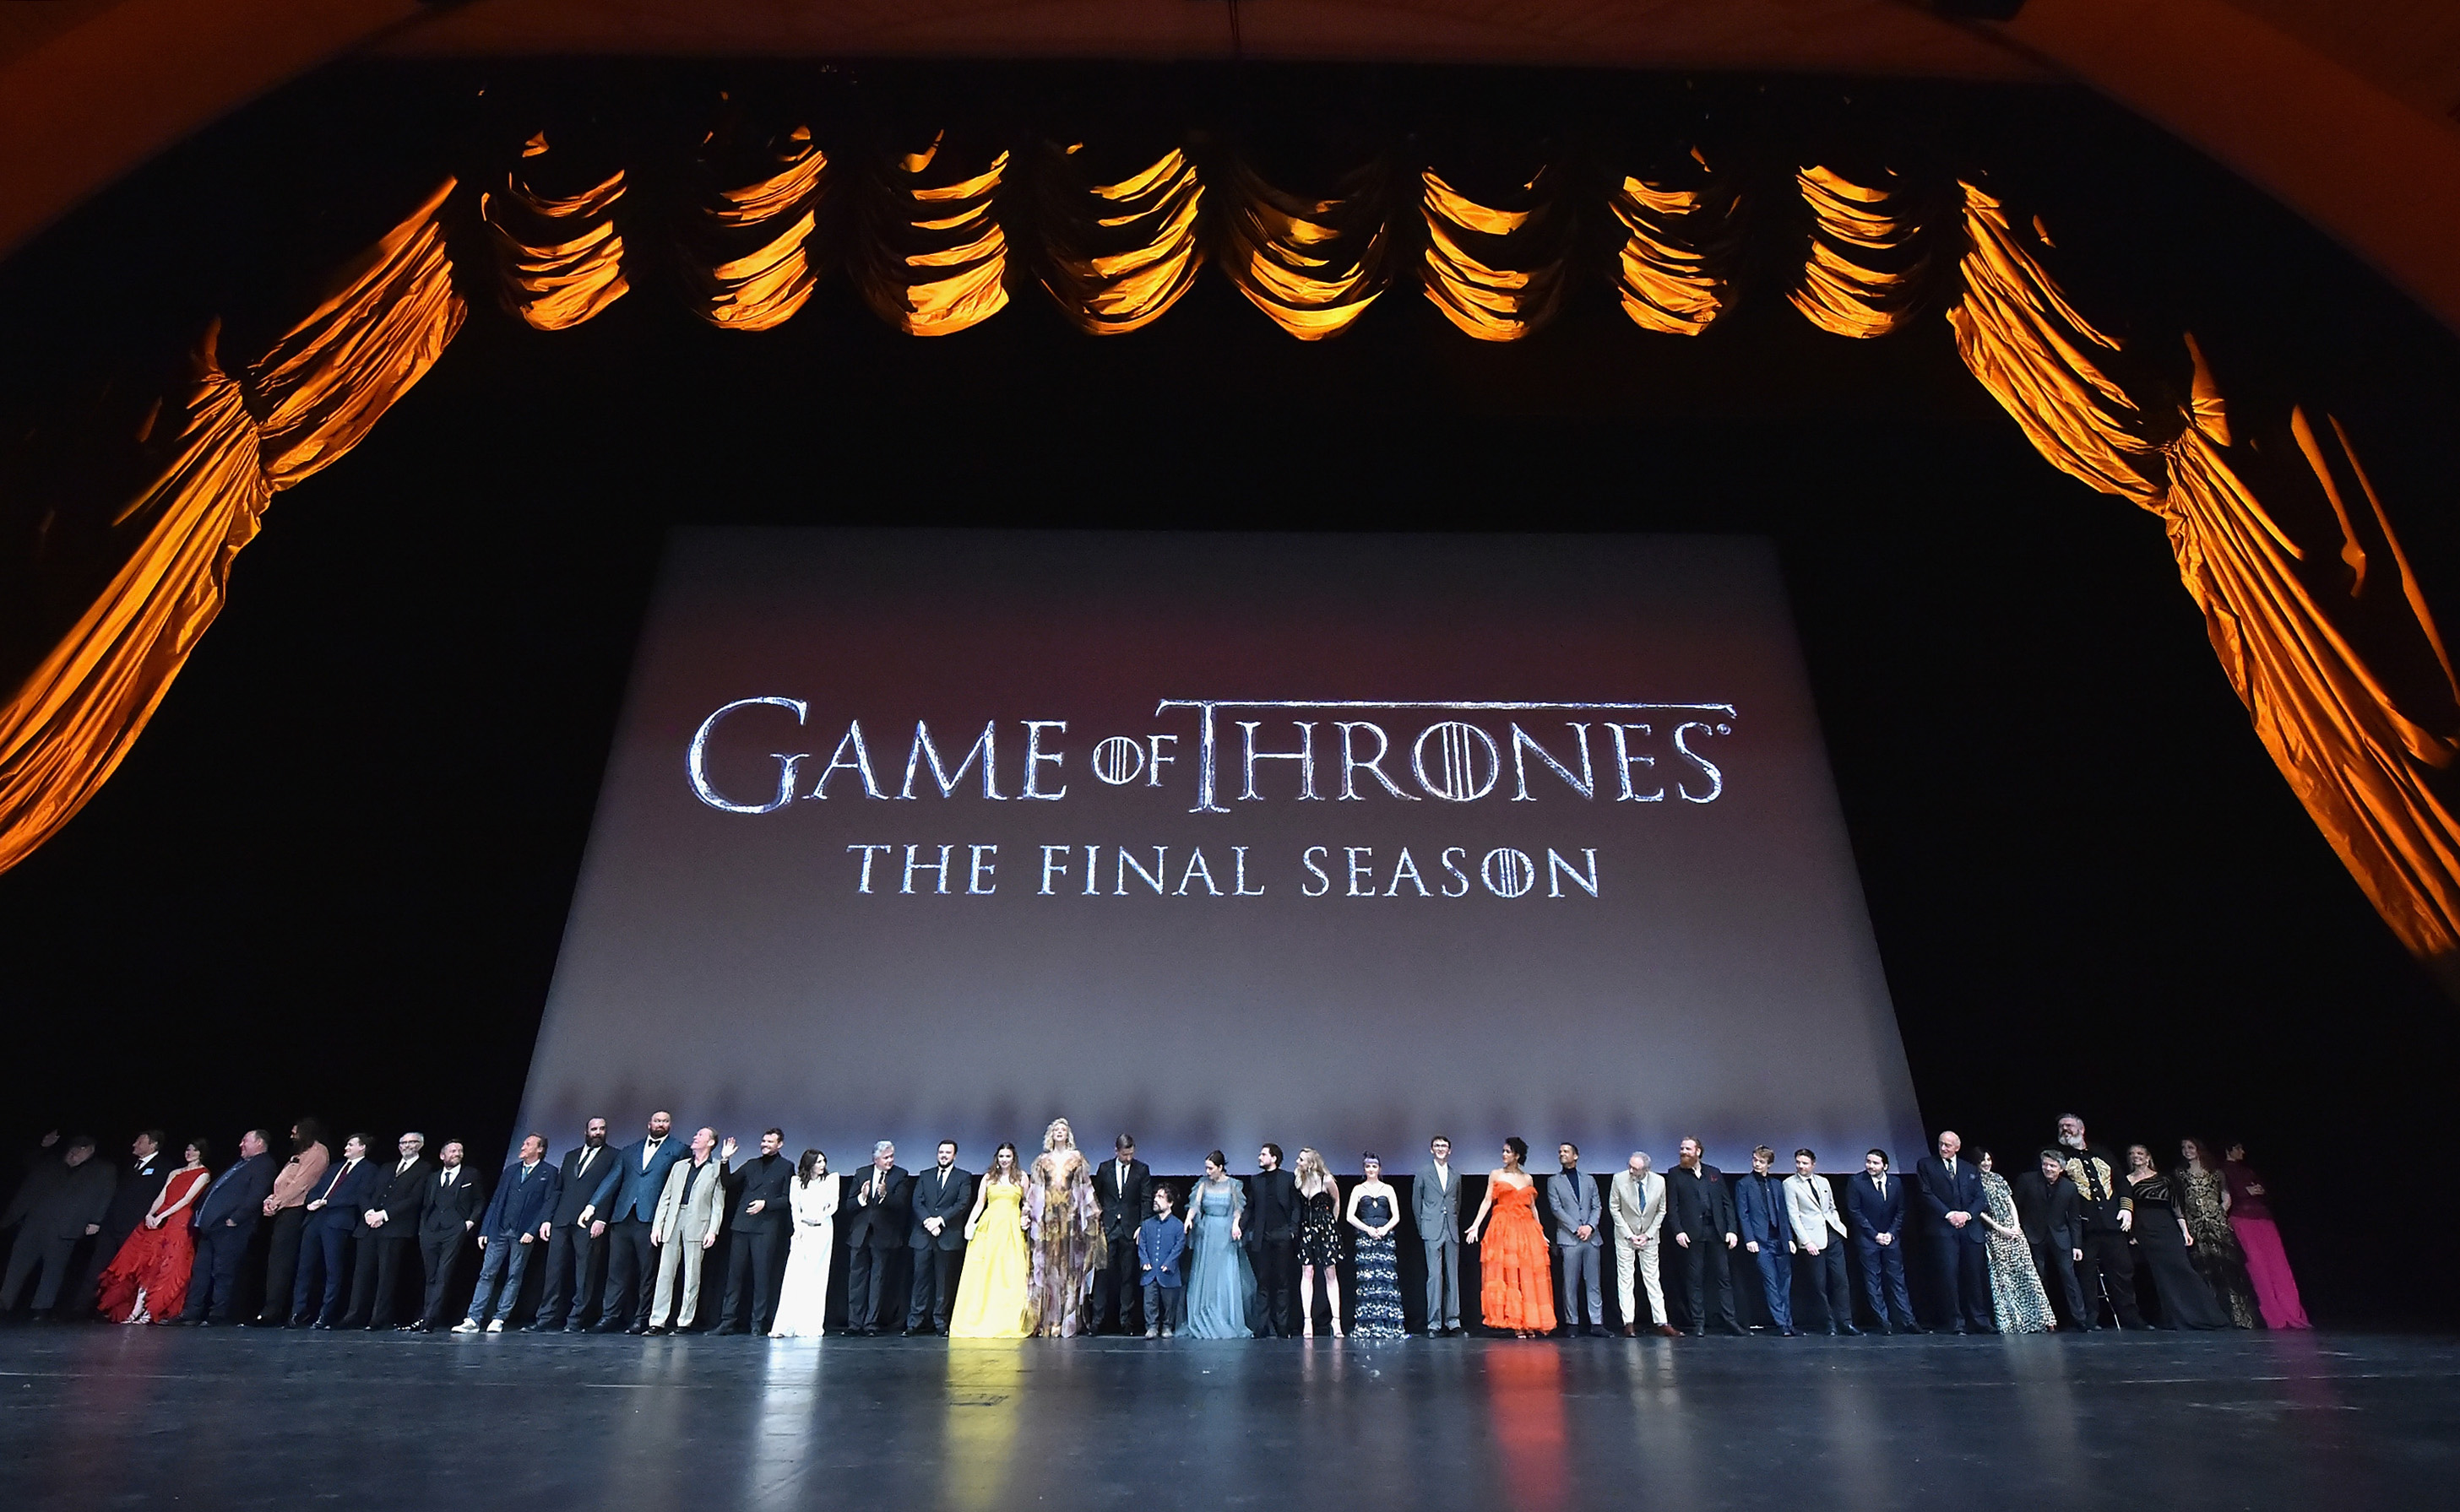 Game of Thrones' NYC season 8 premiere was a once-in-a-lifetime experience